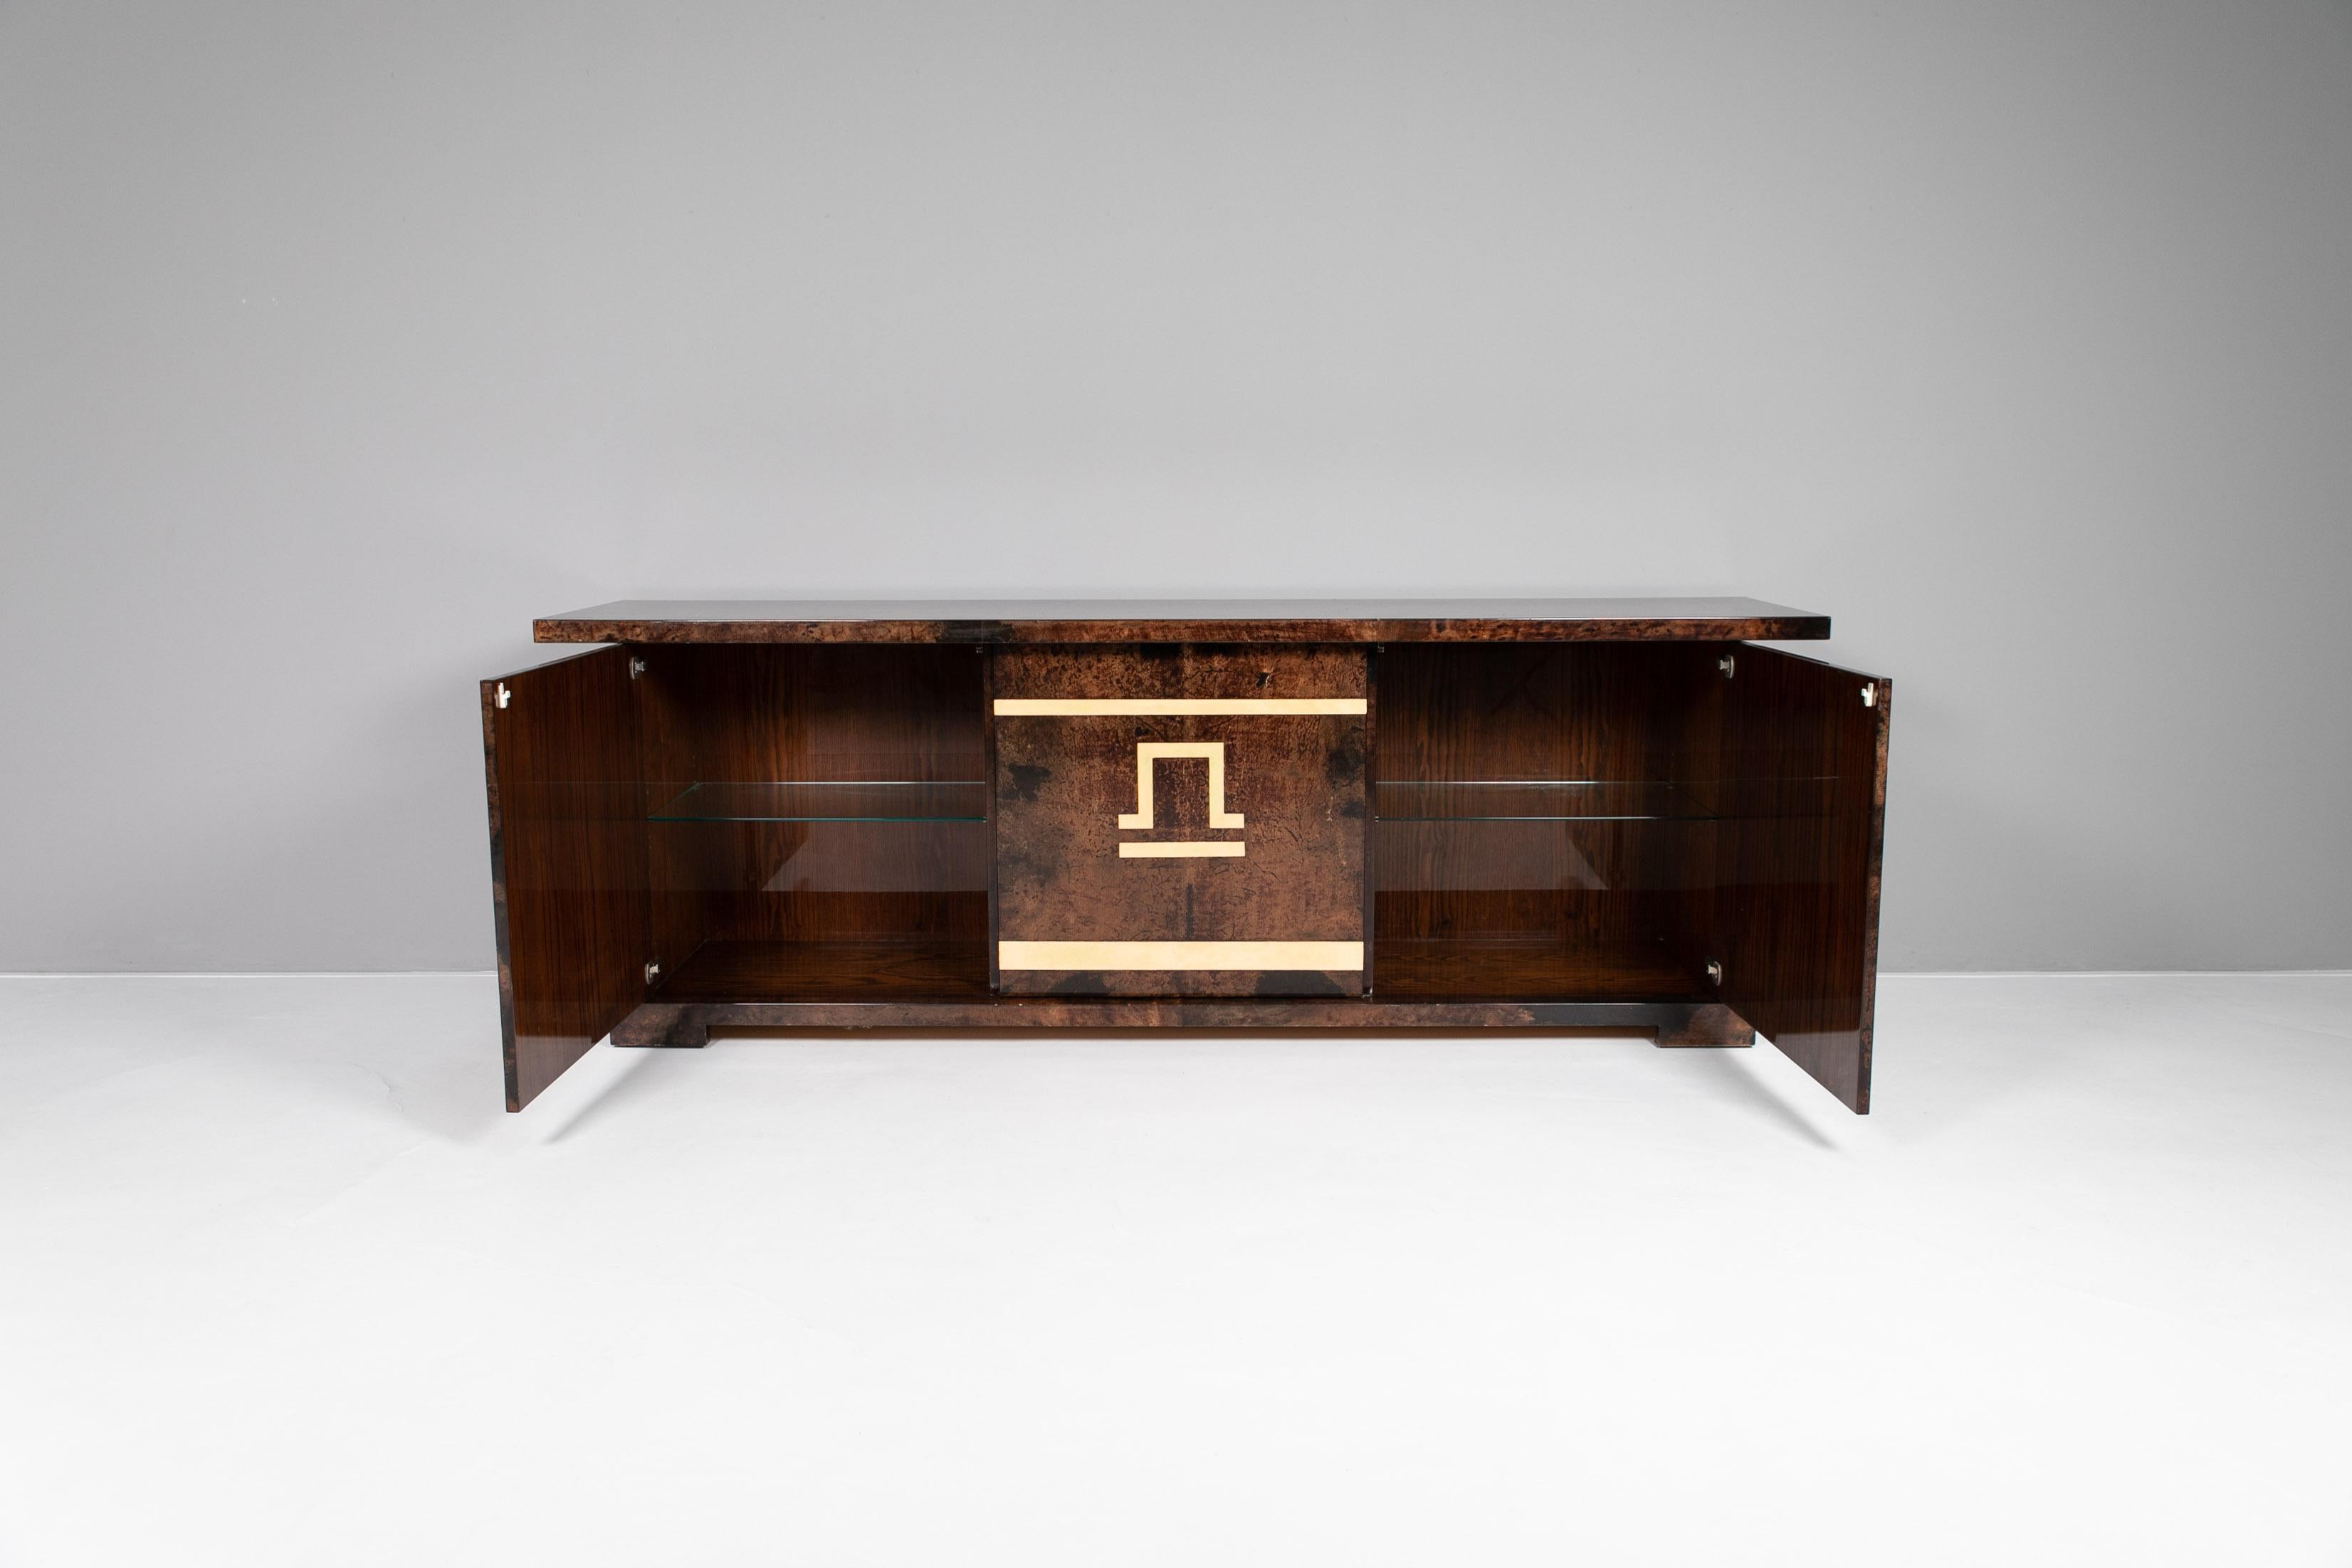 Lacquered Aldo Tura, Sideboard, 1970 For Sale